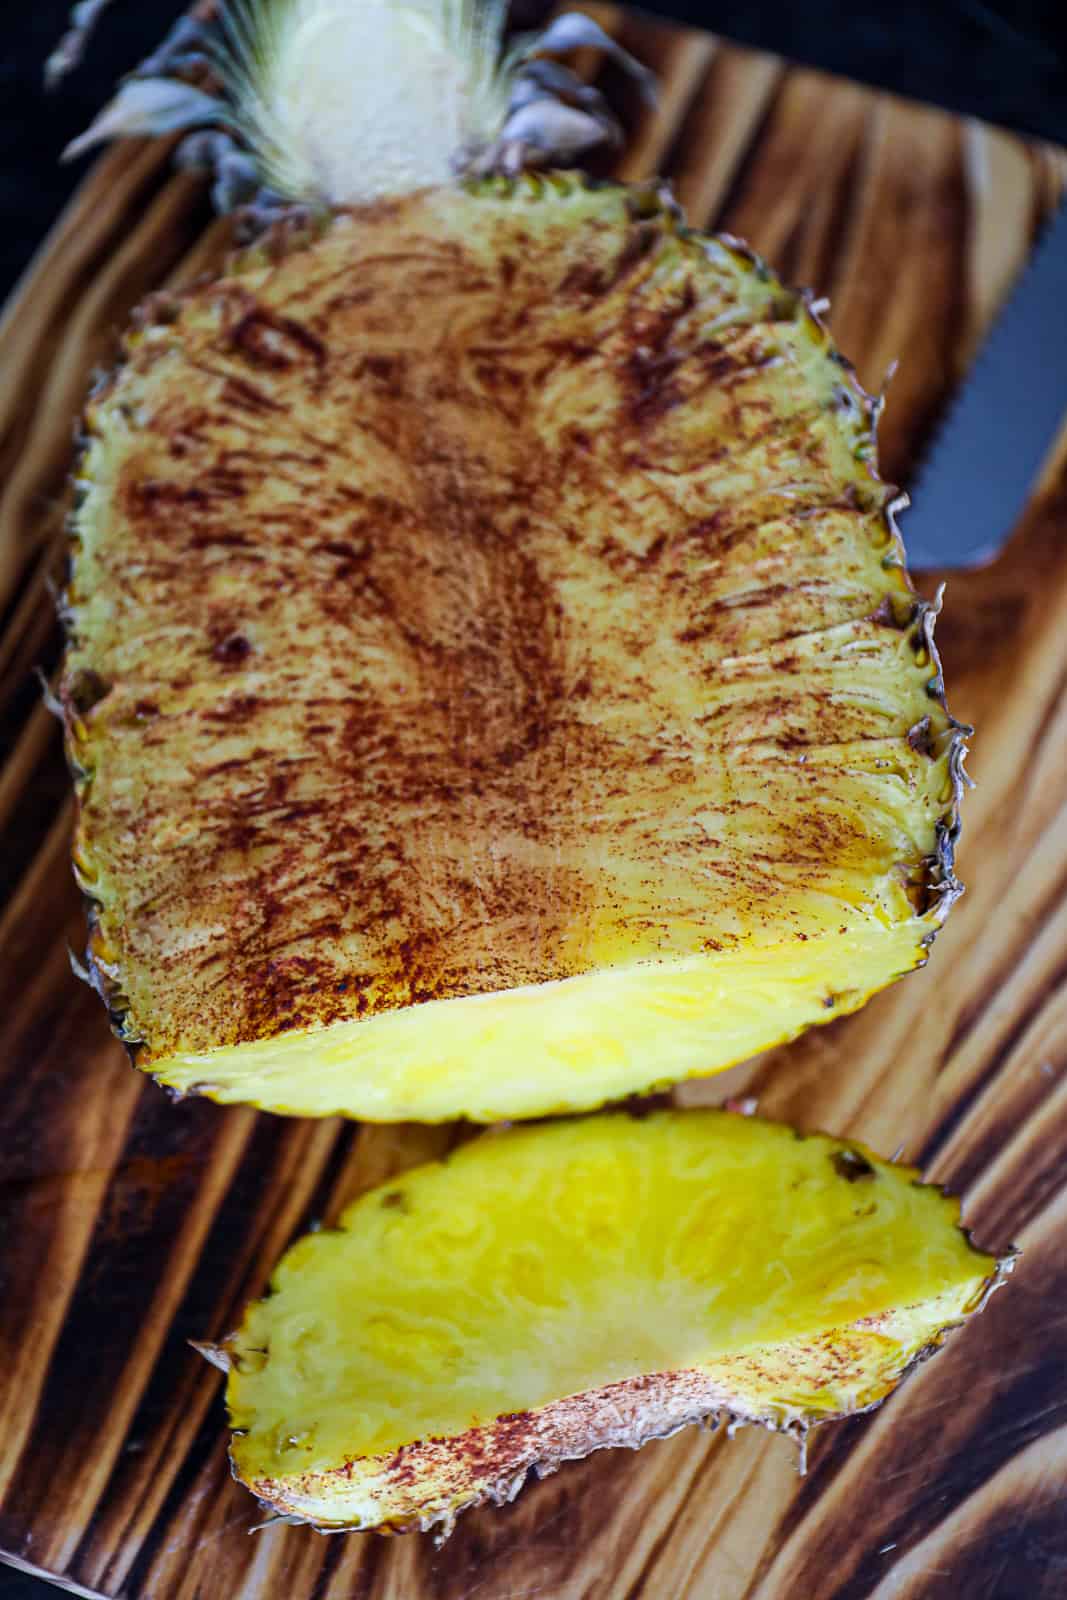 Traeger Smoked Pineapple With Bottom Sliced Off